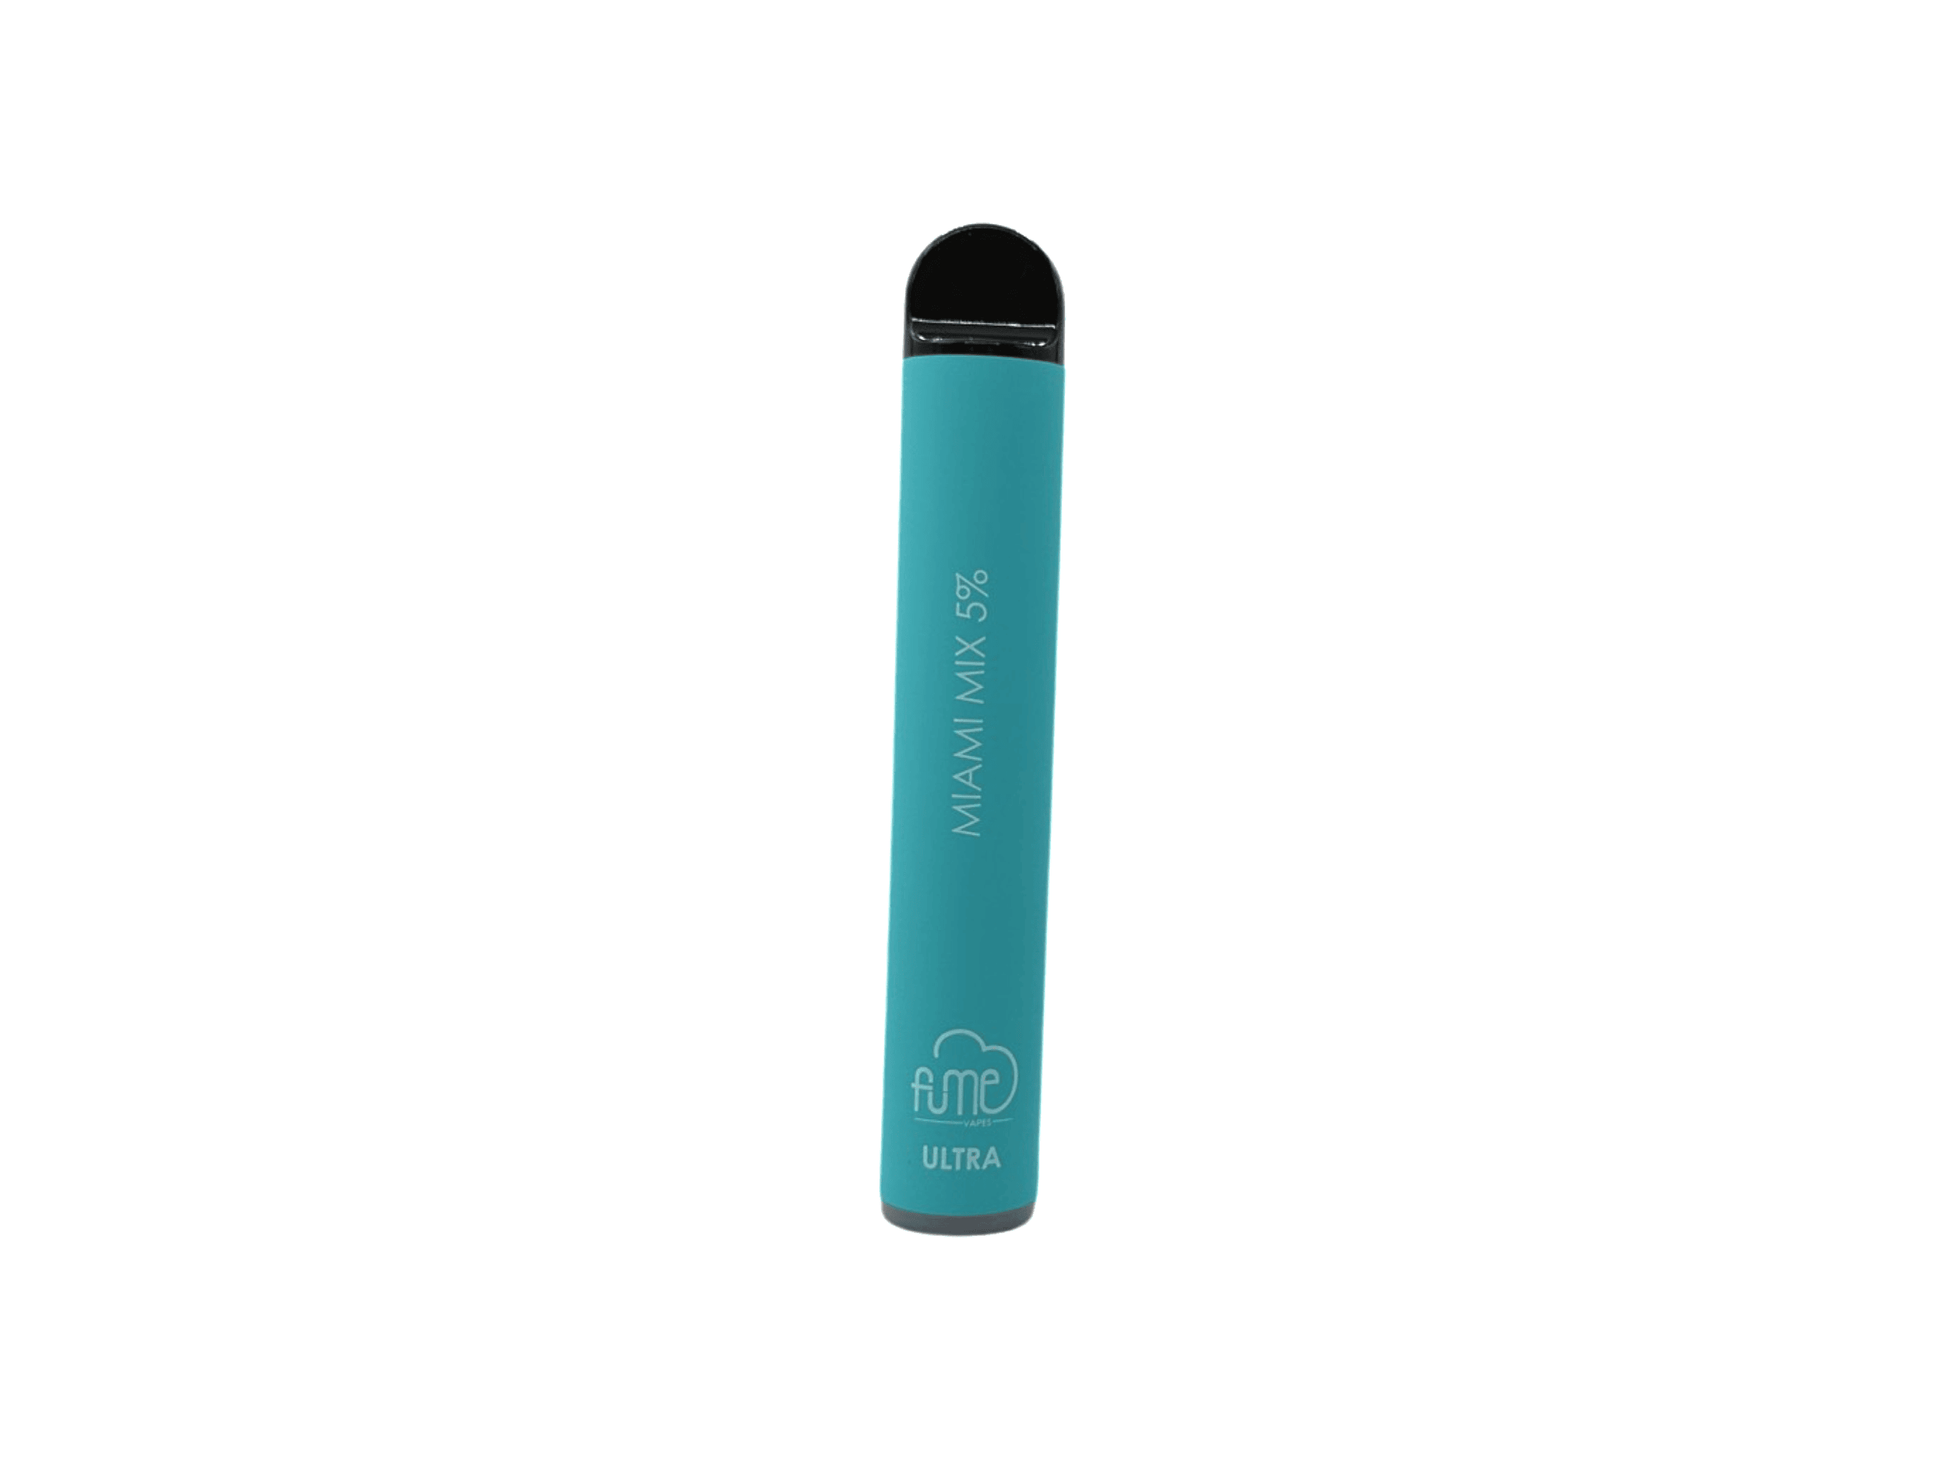 Fume Ultra Miami Mix flavored disposable vape device.